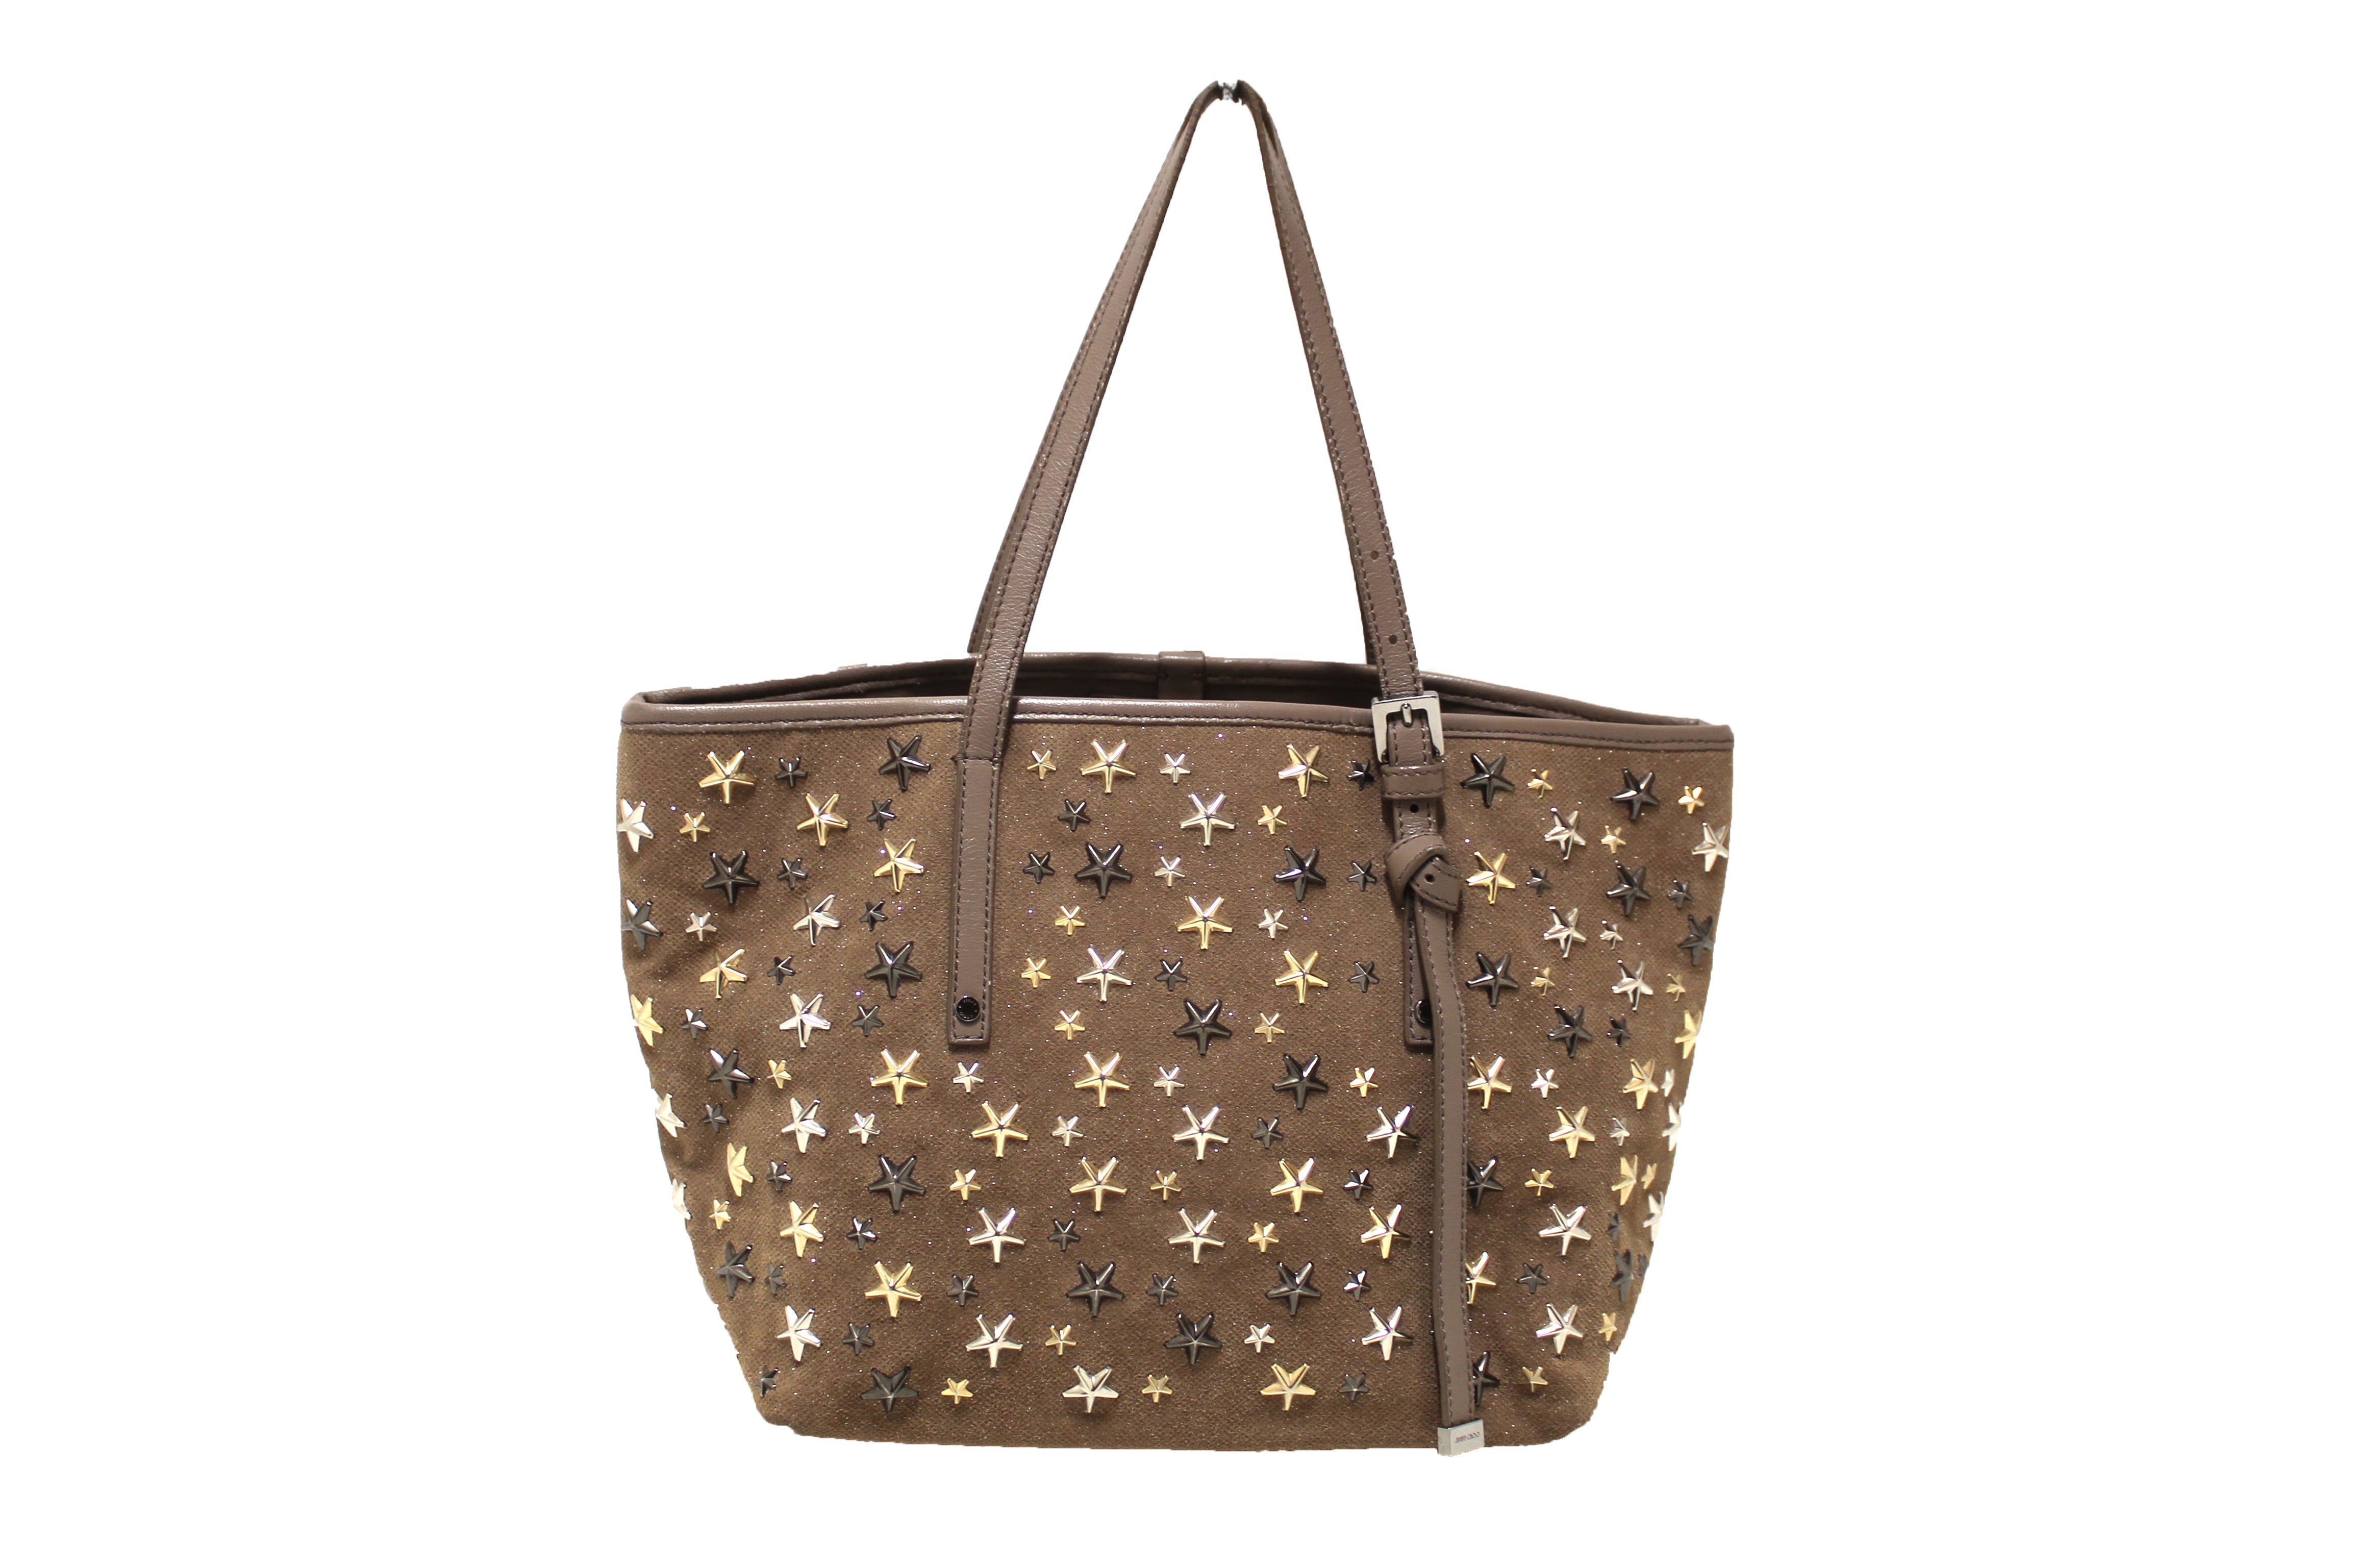 Authentic Jimmy Choo Brown Metallic Fabric with Metal Star Studded Small Tote